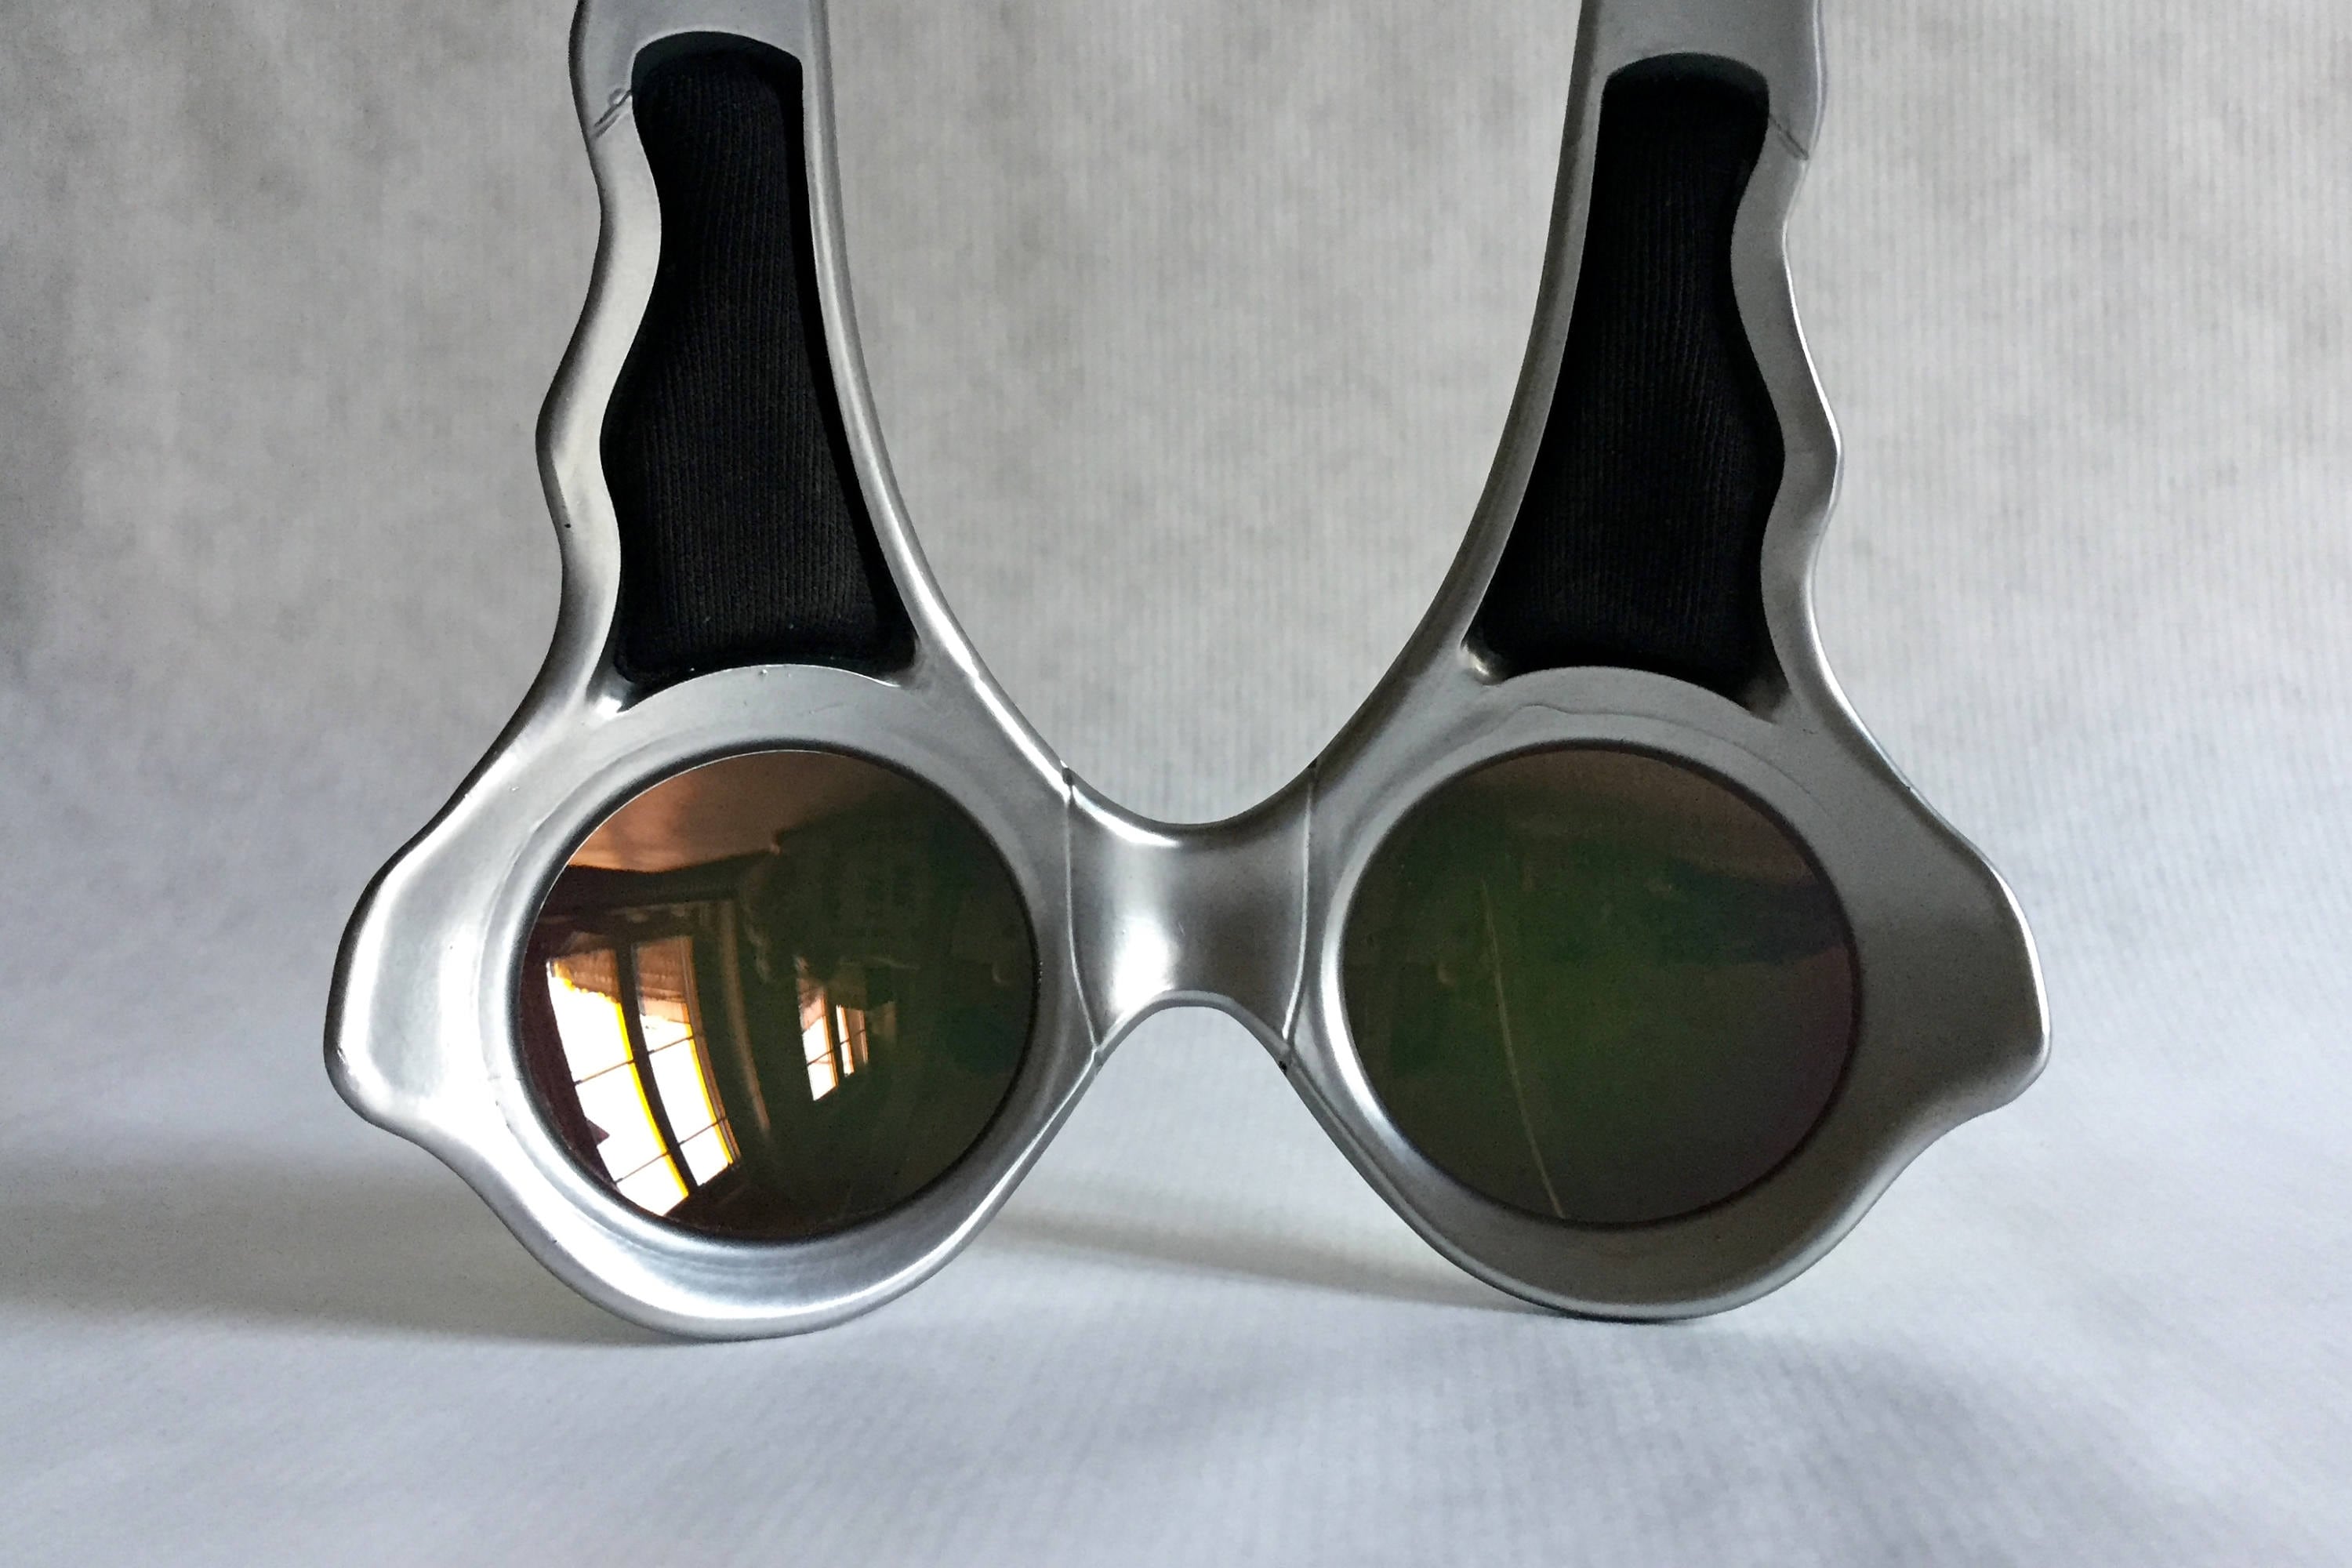 Oakley Overthetop Fire Iridium FMJ Vintage Sunglasses New Old Stock  including Extra Set of Lenses and Softpouch